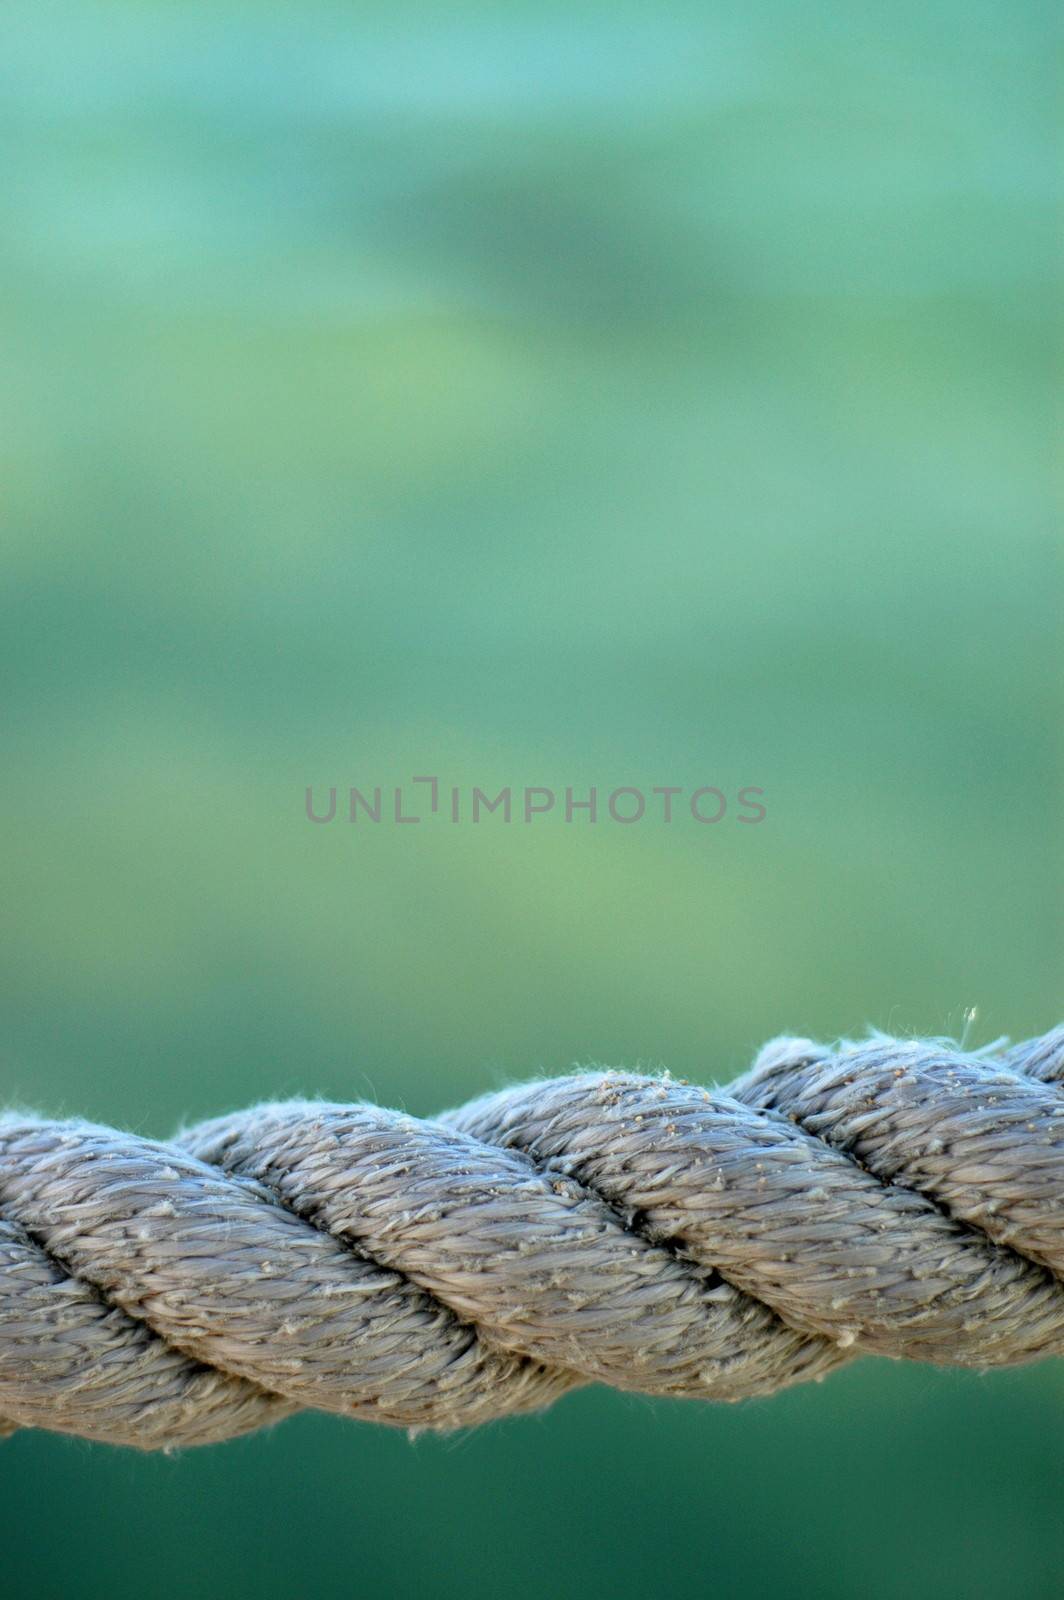 Nautical Image Of Some Weathered Harbor Rope Against A Green Ocean Background With Copy Space